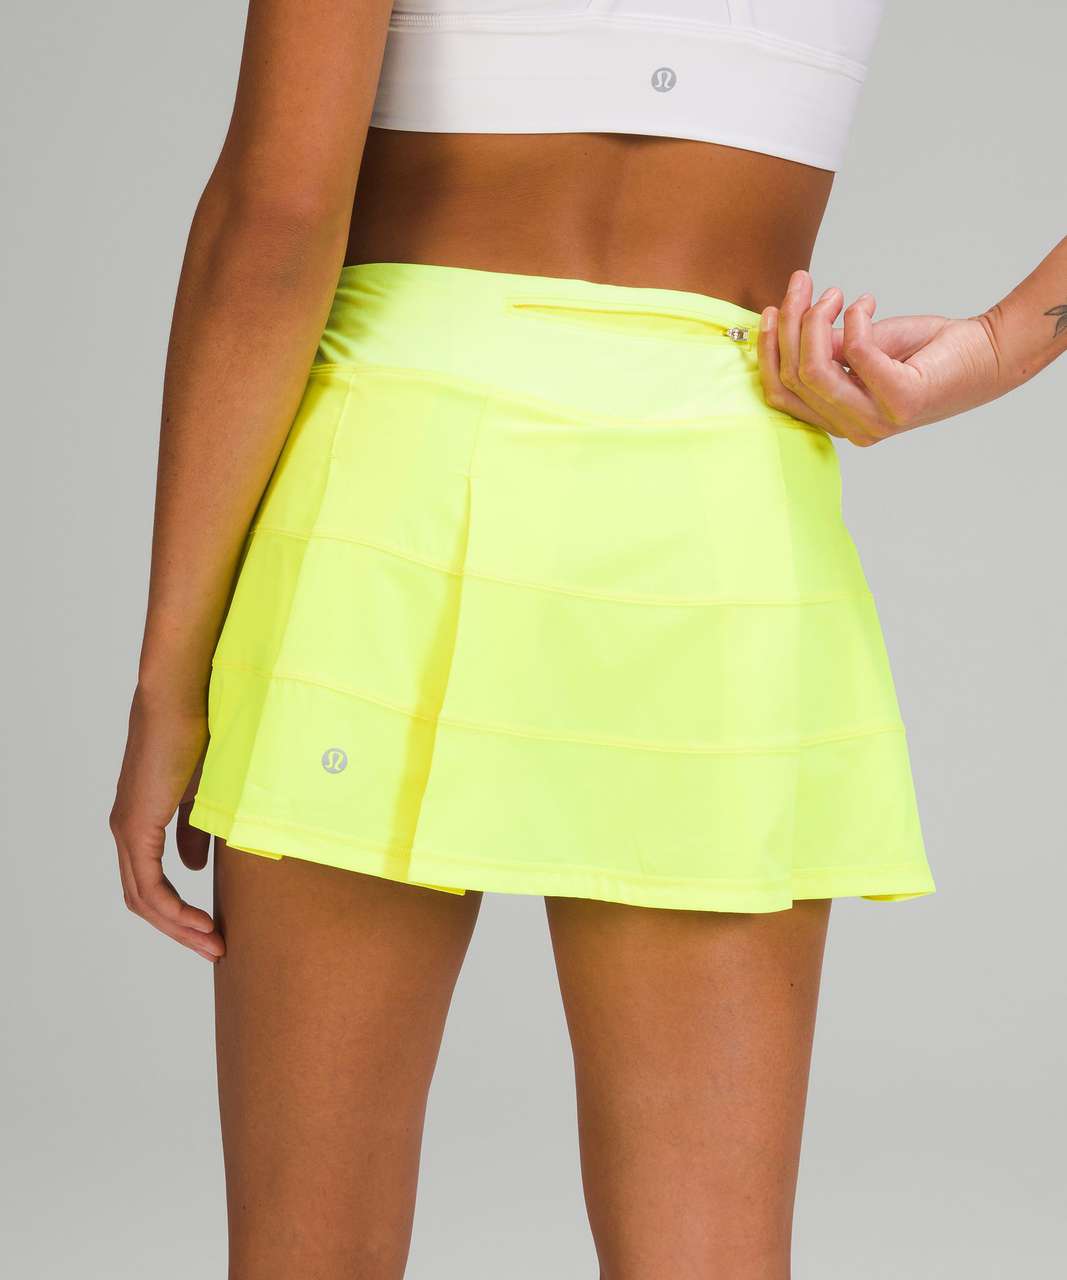 Lululemon Pace Rival Mid-Rise Skirt - Highlight Yellow